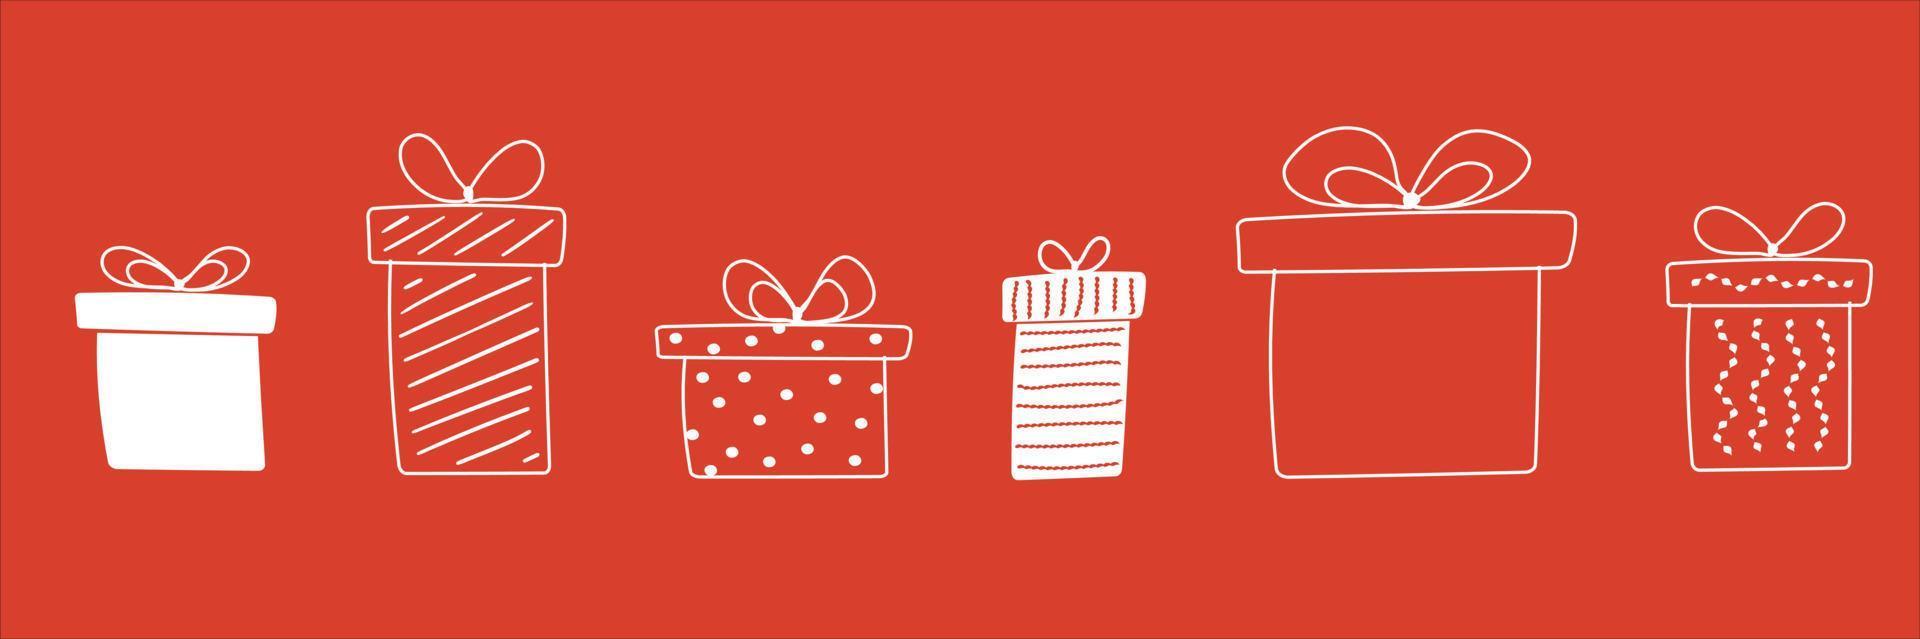 Set gifts line art. White icon. Gifts with dot, striped White and red colors. Vector illustration